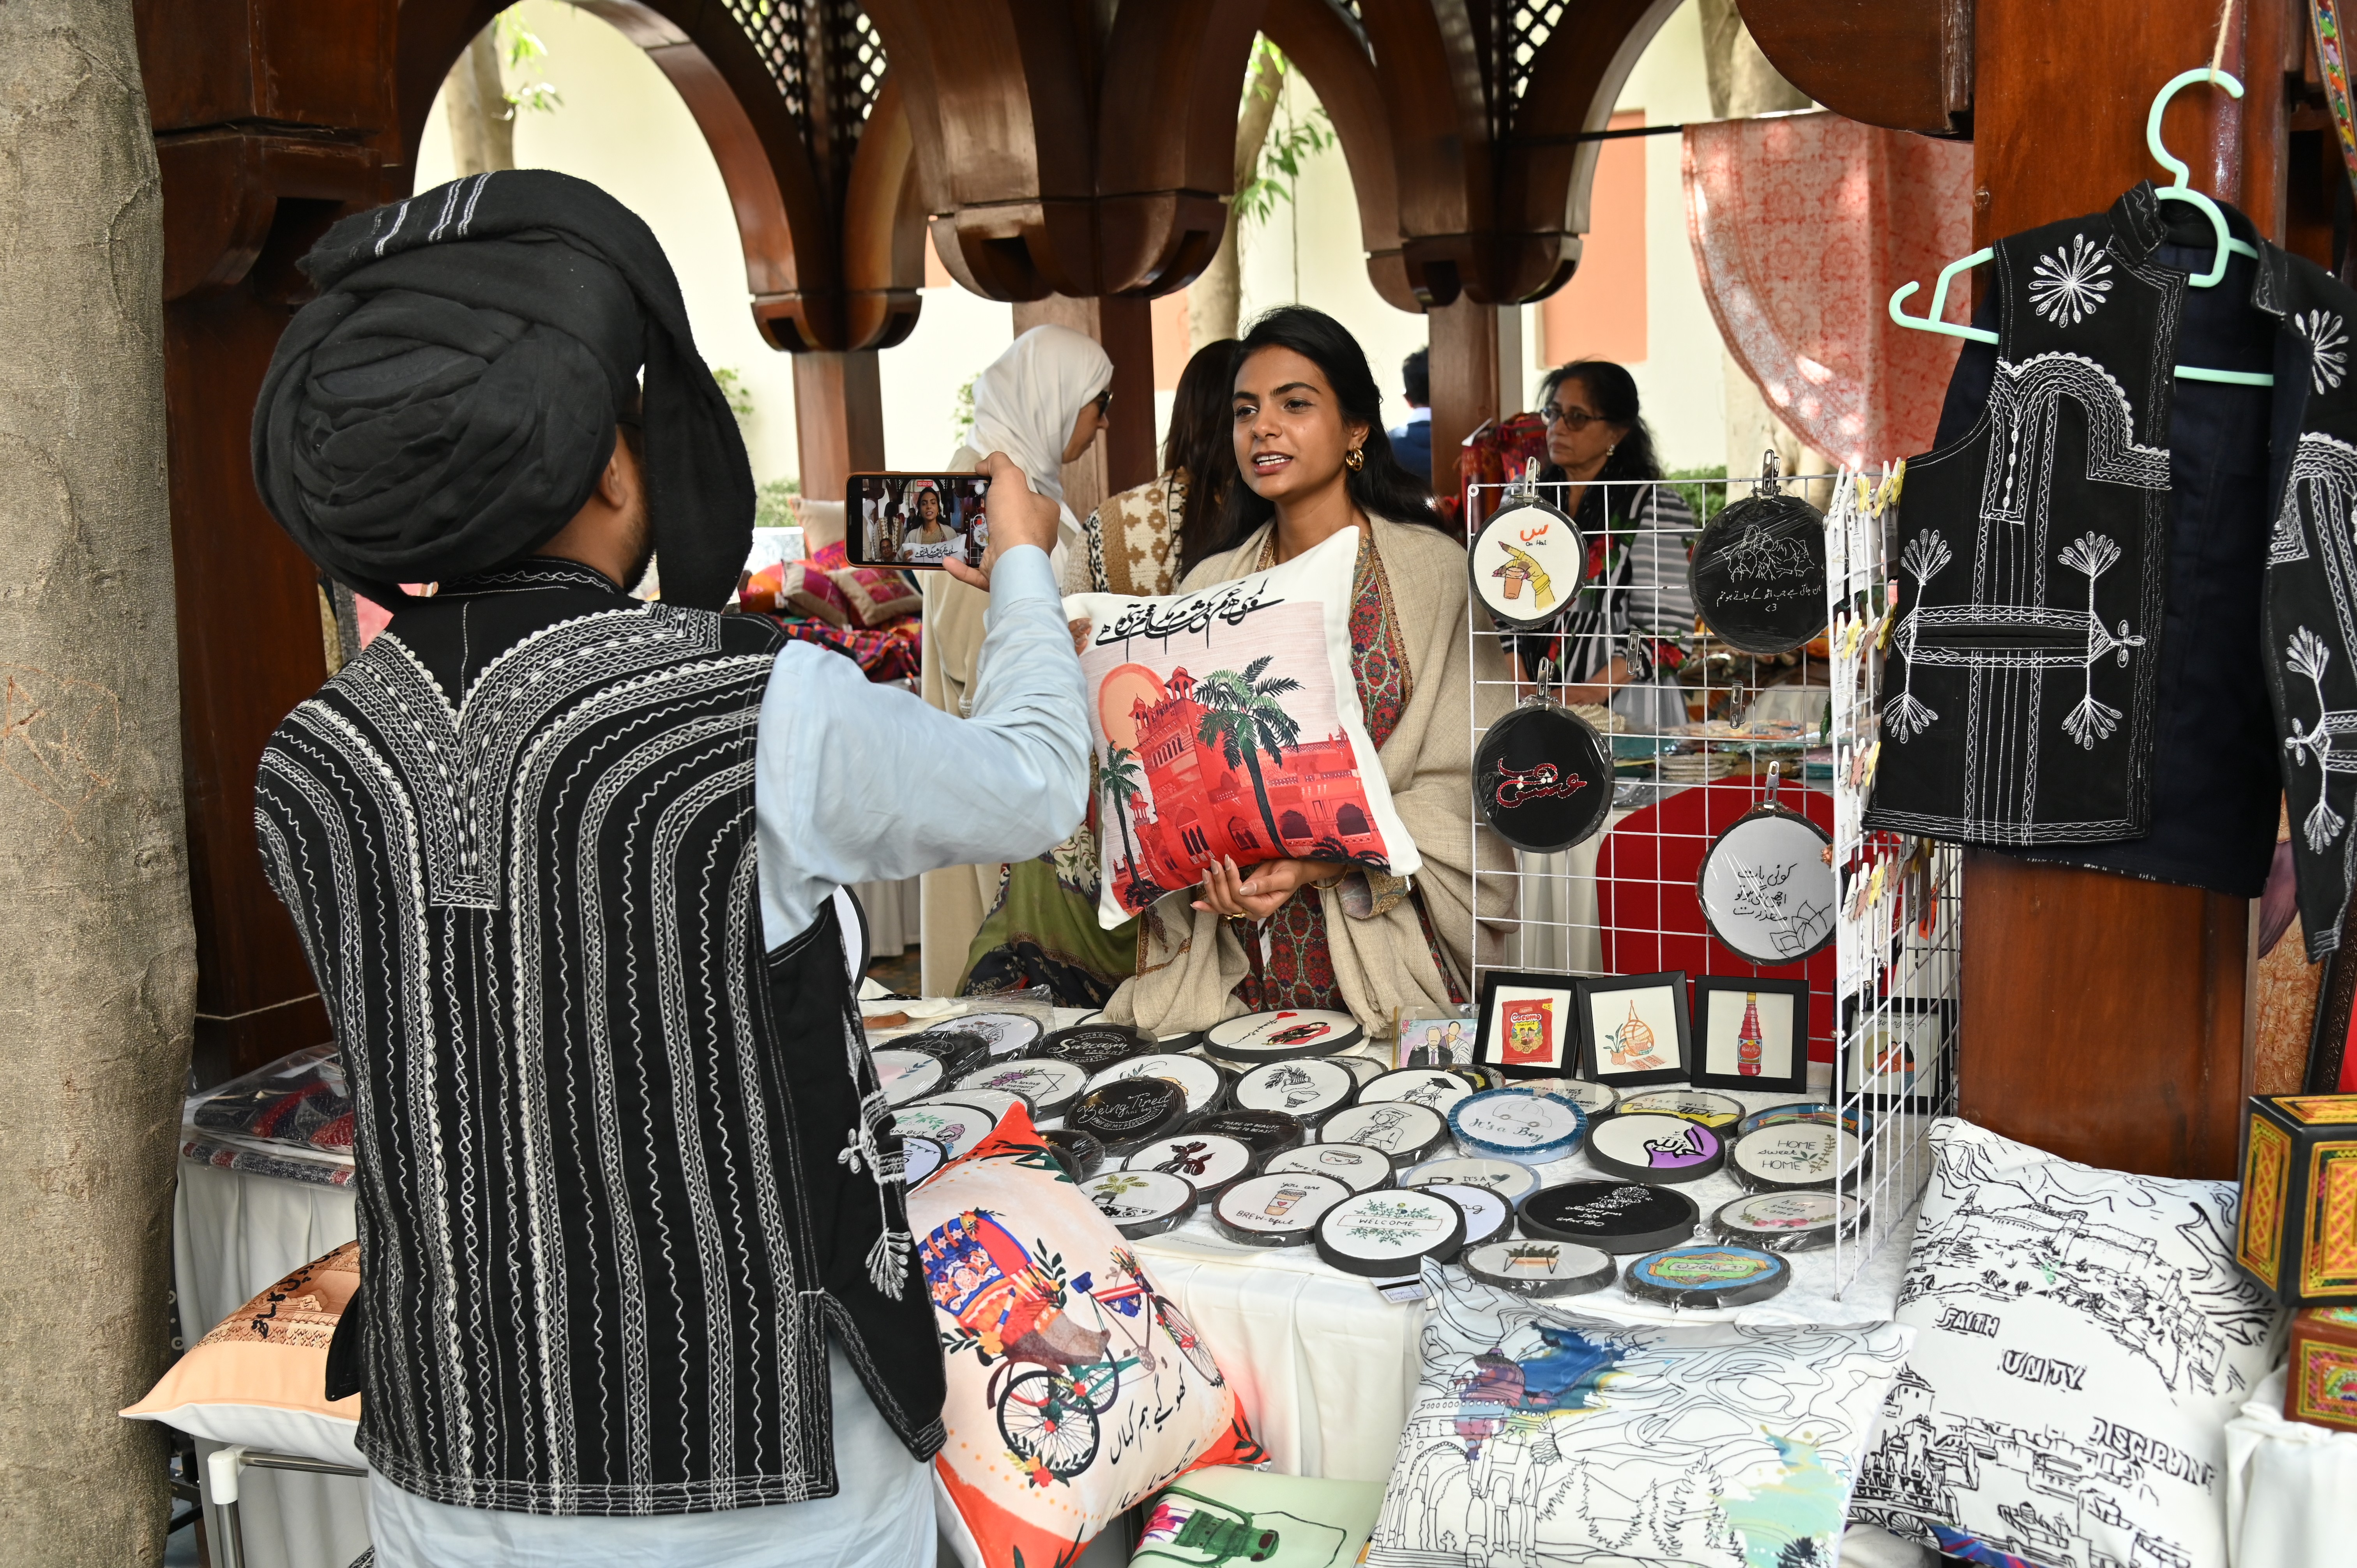 A young girl selling various embroidered frames